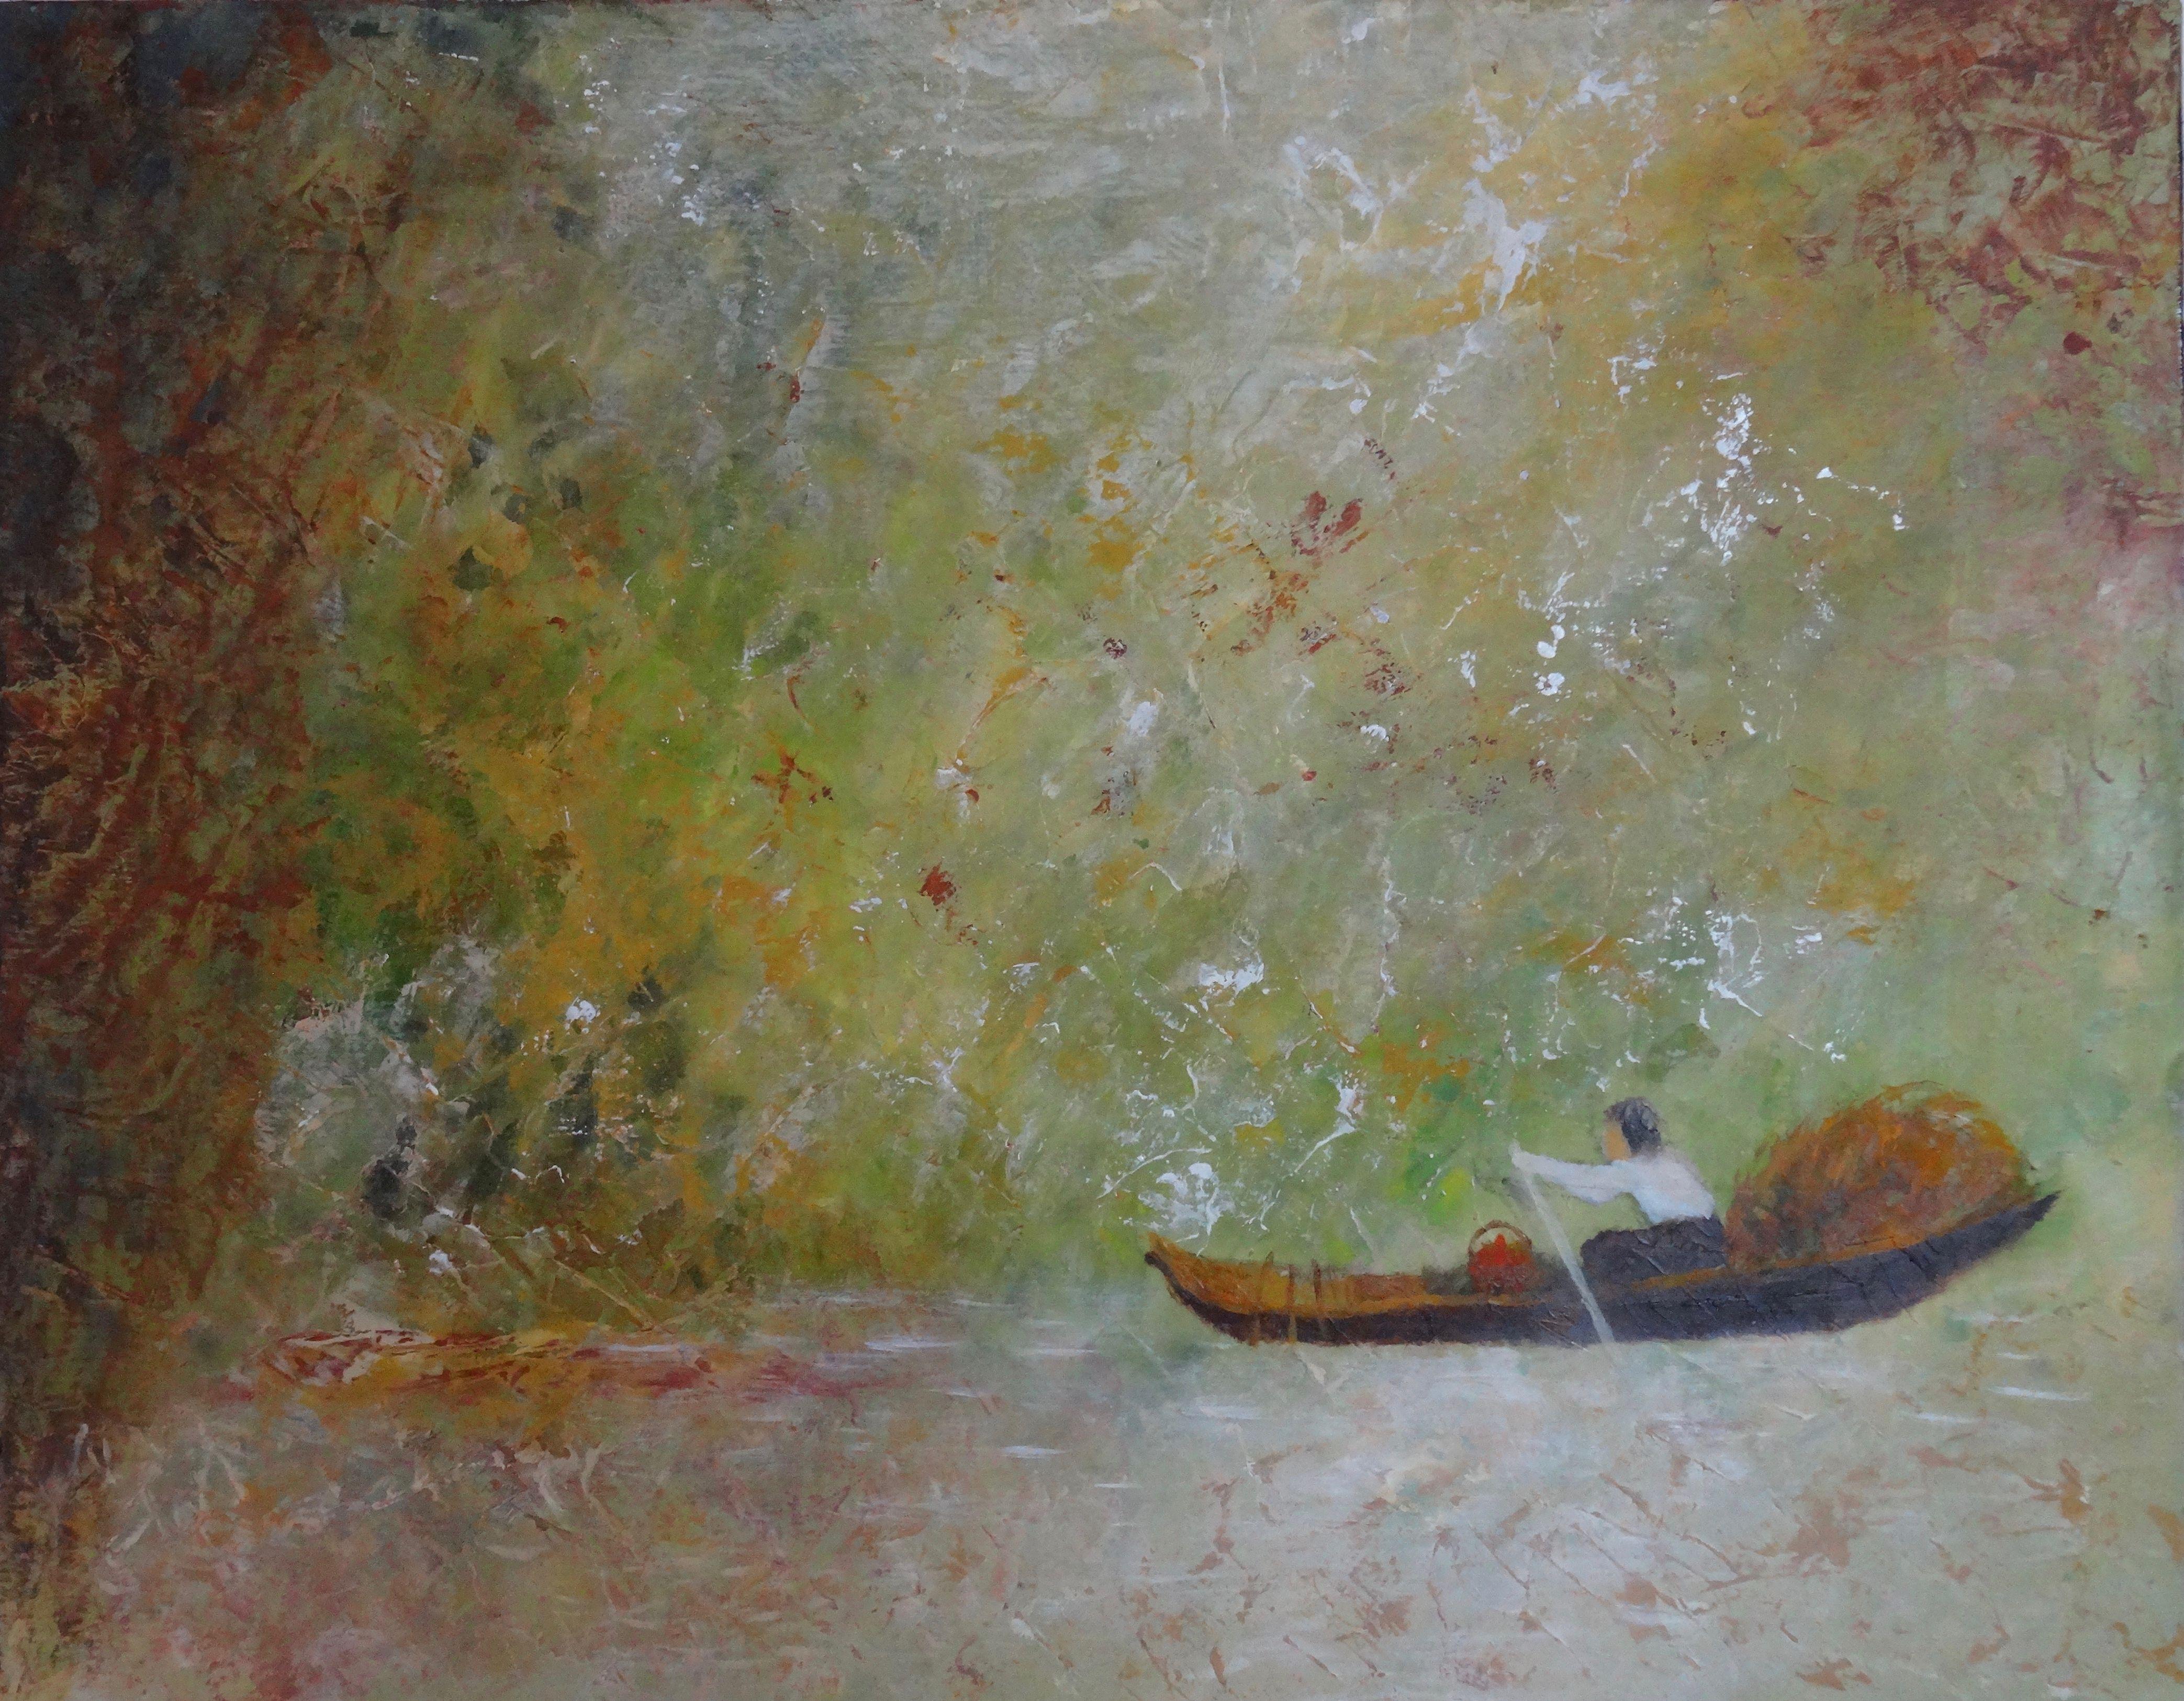 Thinking on Asia where people  are boating and transporting on rivers :: Painting :: Impressionist :: This piece comes with an official certificate of authenticity signed by the artist :: Ready to Hang: Yes :: Signed: Yes :: Signature Location: on